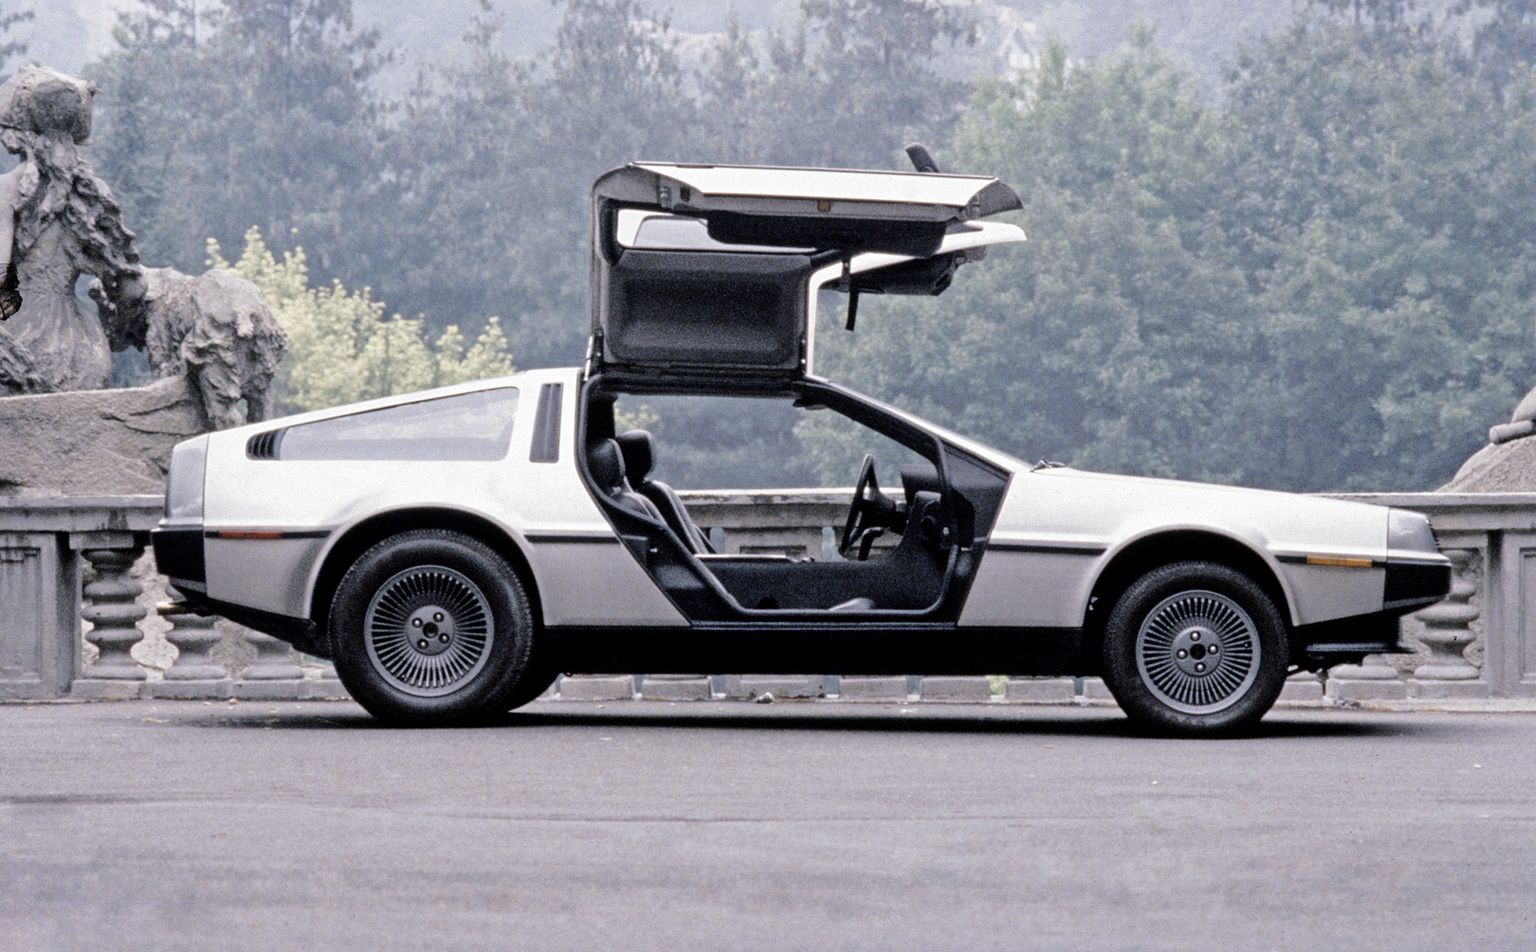 Why The DeLorean DMC-12 Is The Coolest Car Ever Used In A Movie